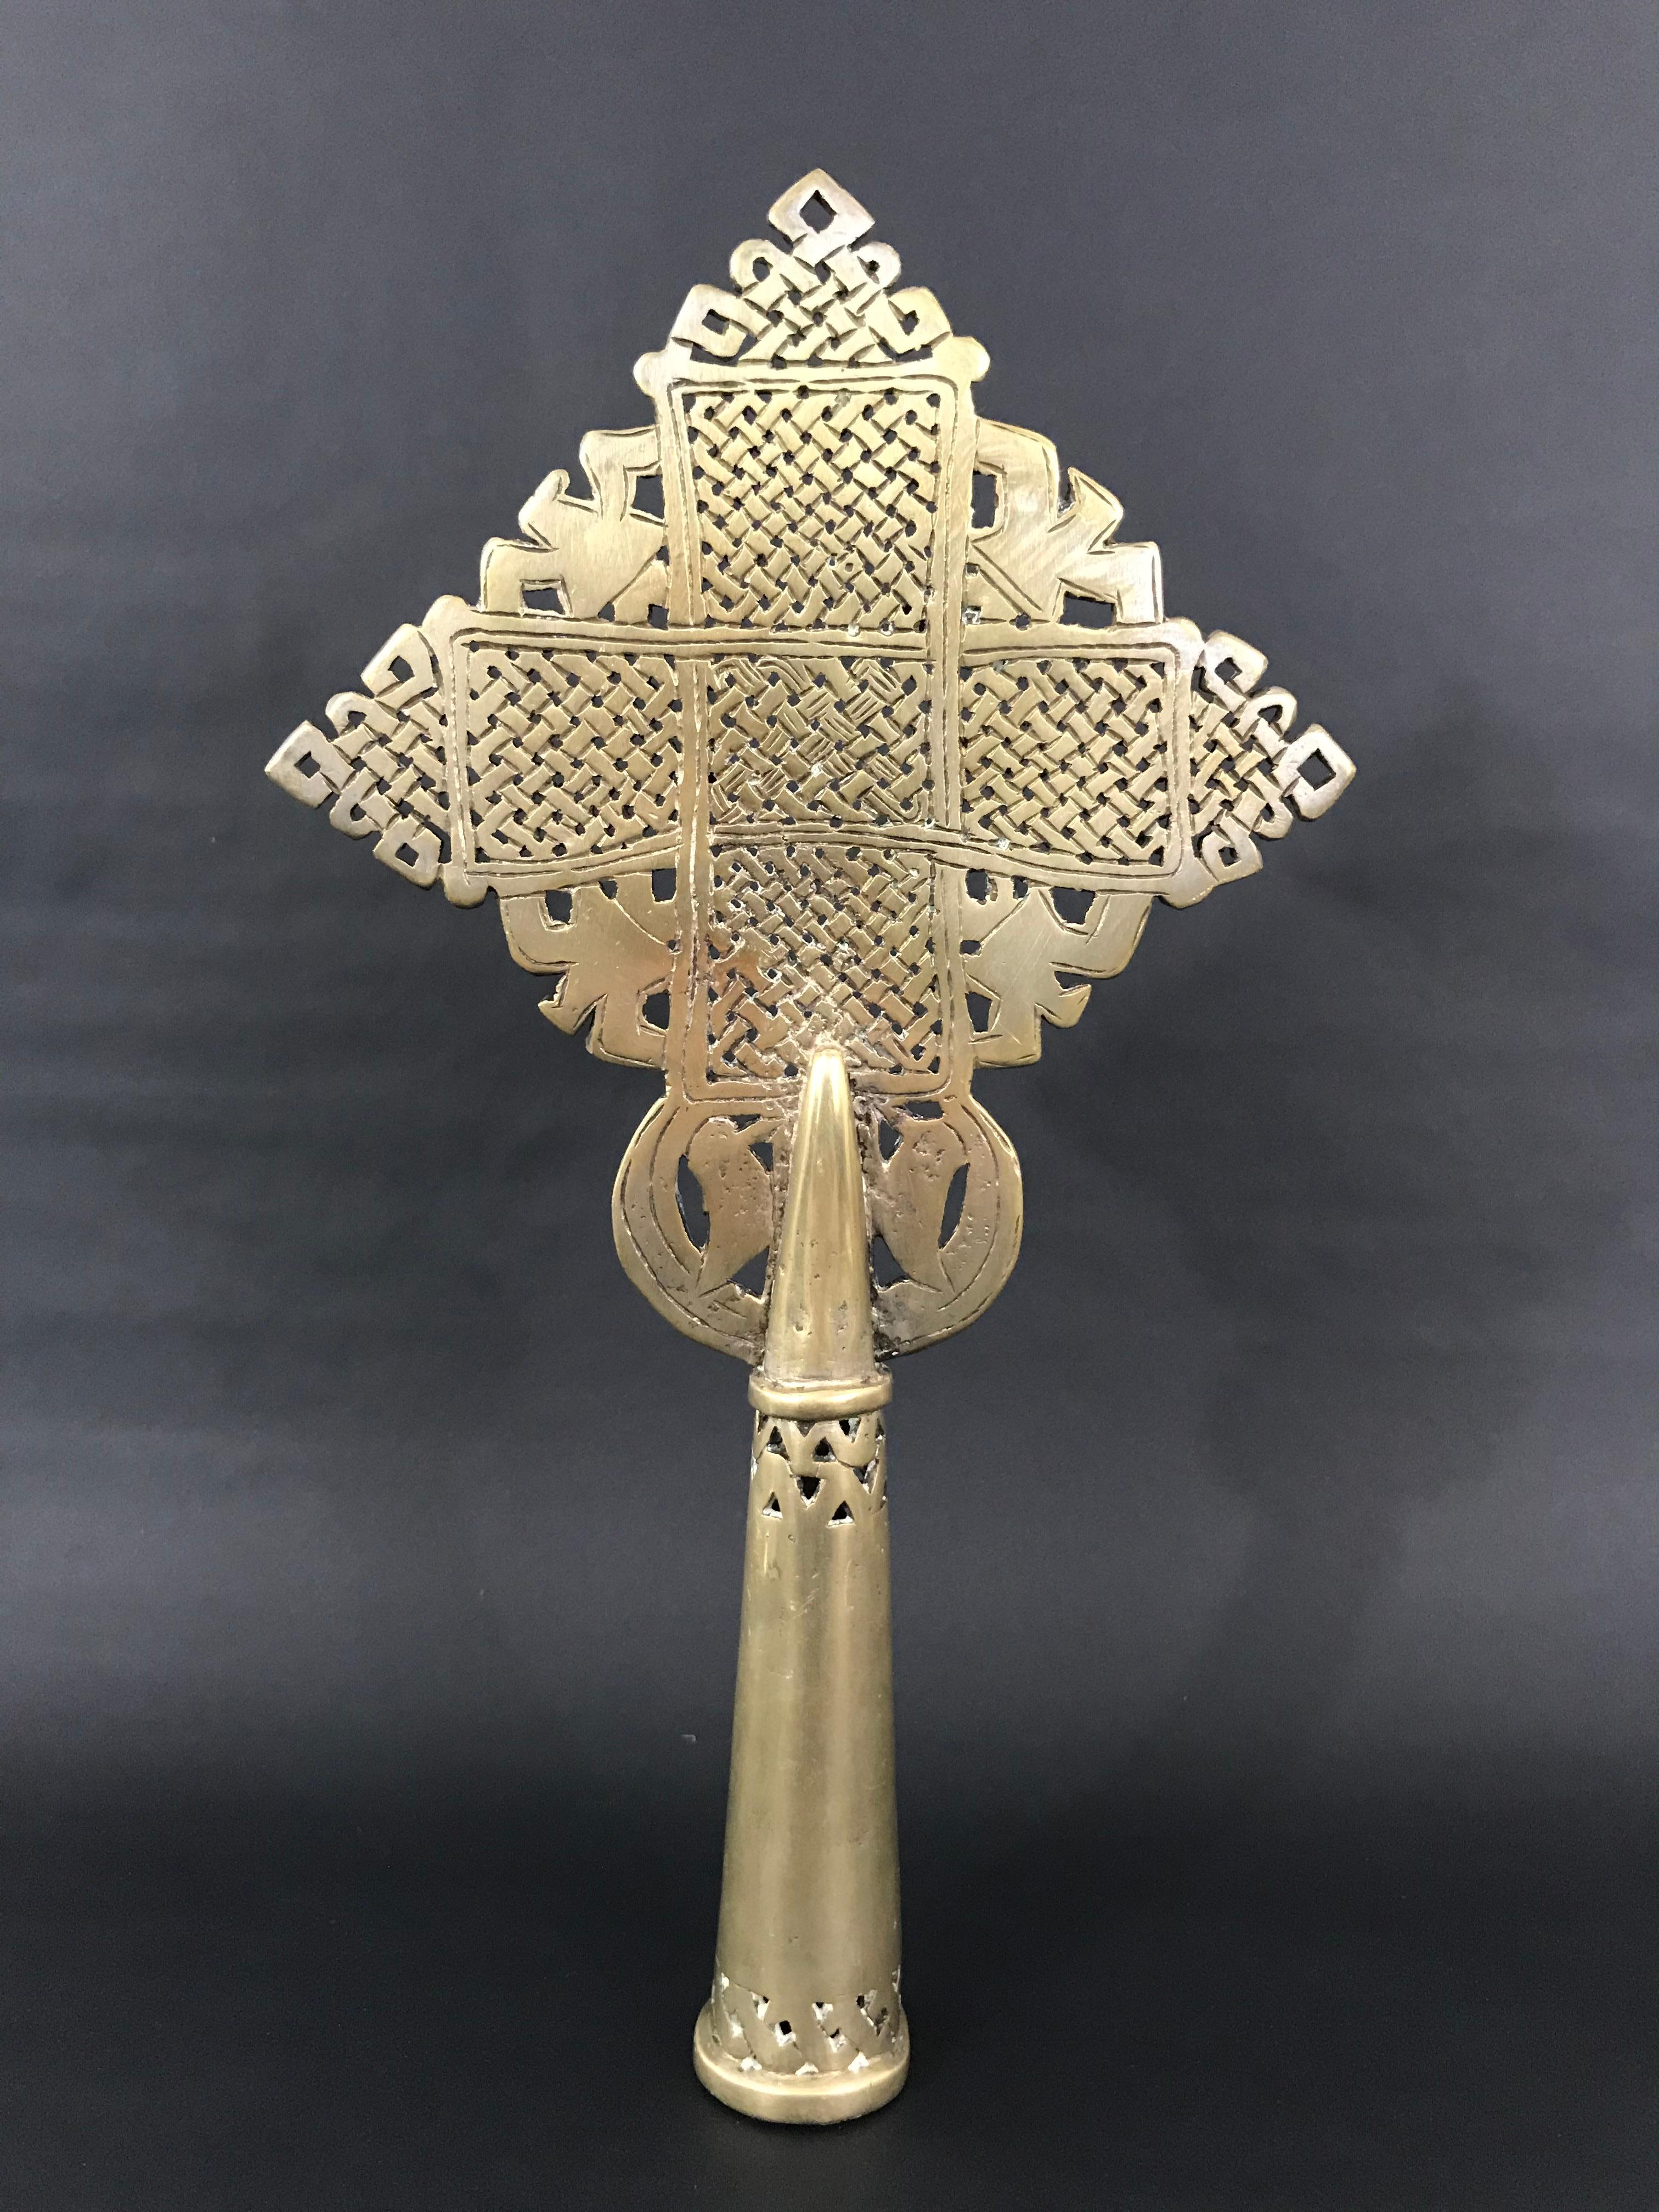 Coptic processional cross in openwork bronze with tracery and bird decorations.
These crosses are worn by Coptic Orthodox priests from Ethiopia and Egypt during ceremonies,
Est Africa
End of the 19th early 20th century.